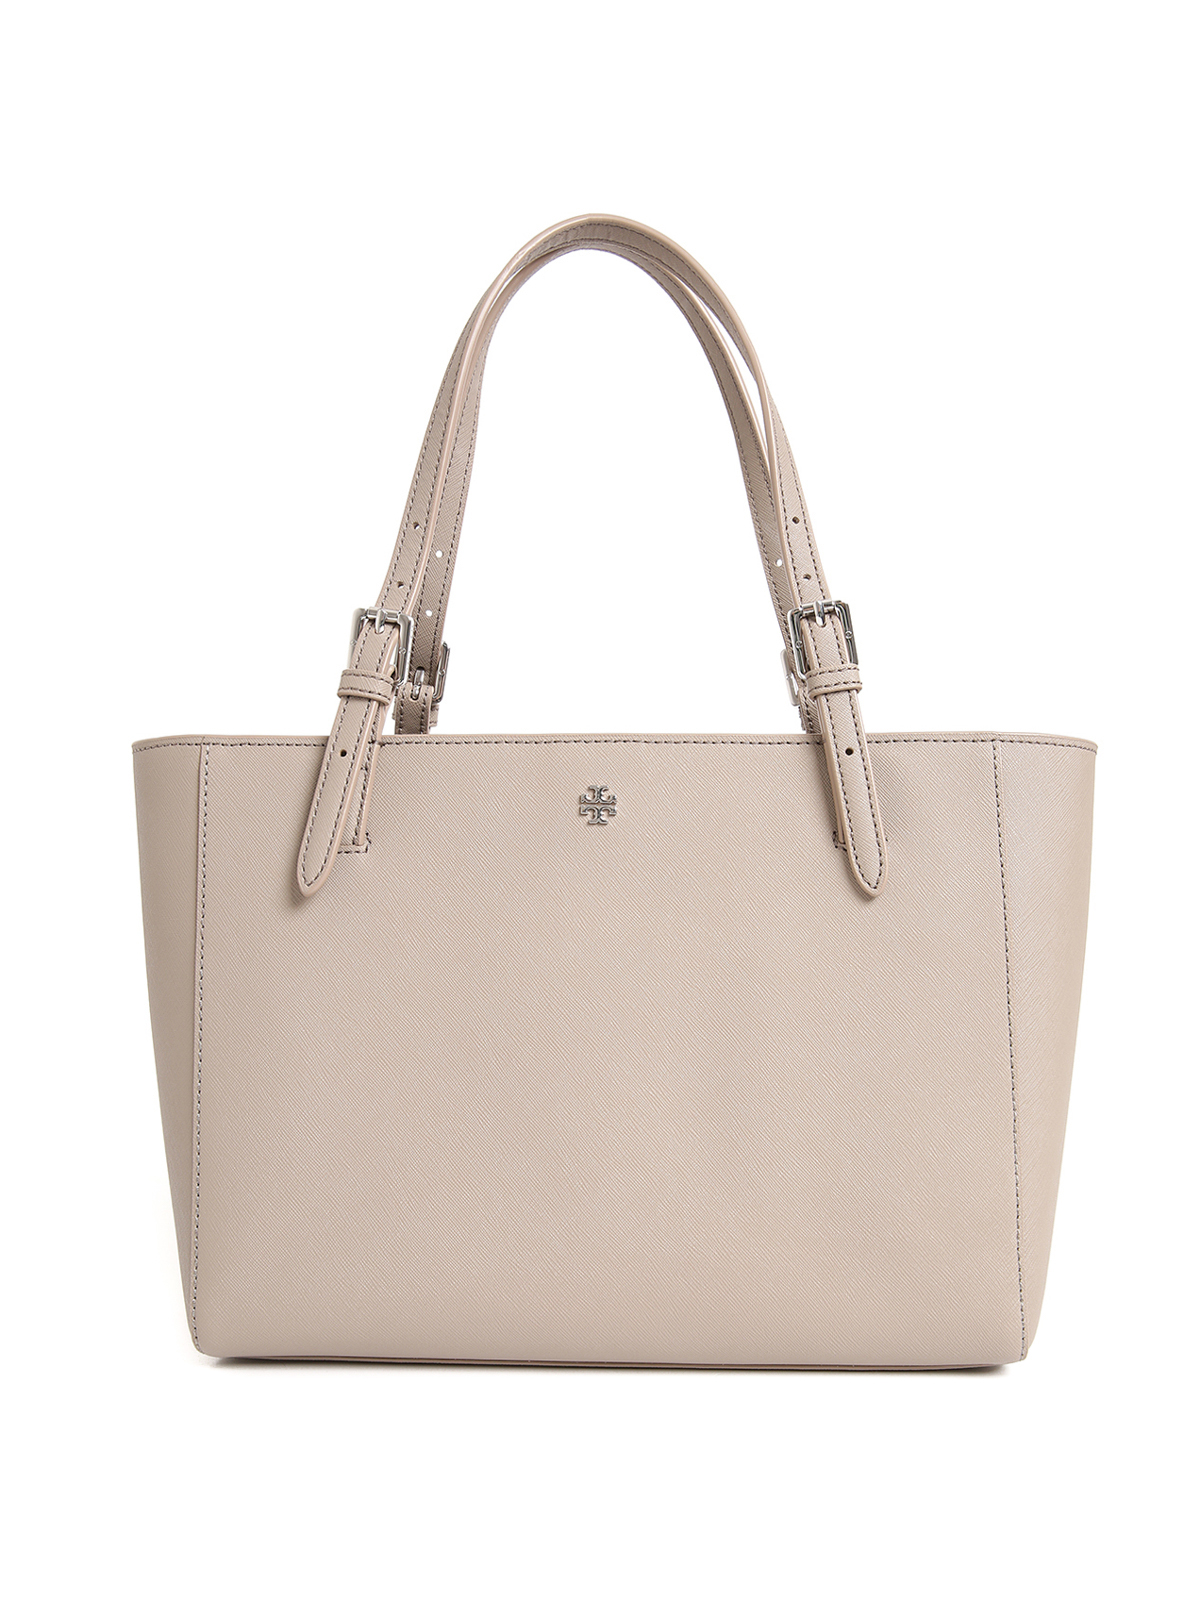 Totes bags Tory Burch - Small York tote - 22159802022